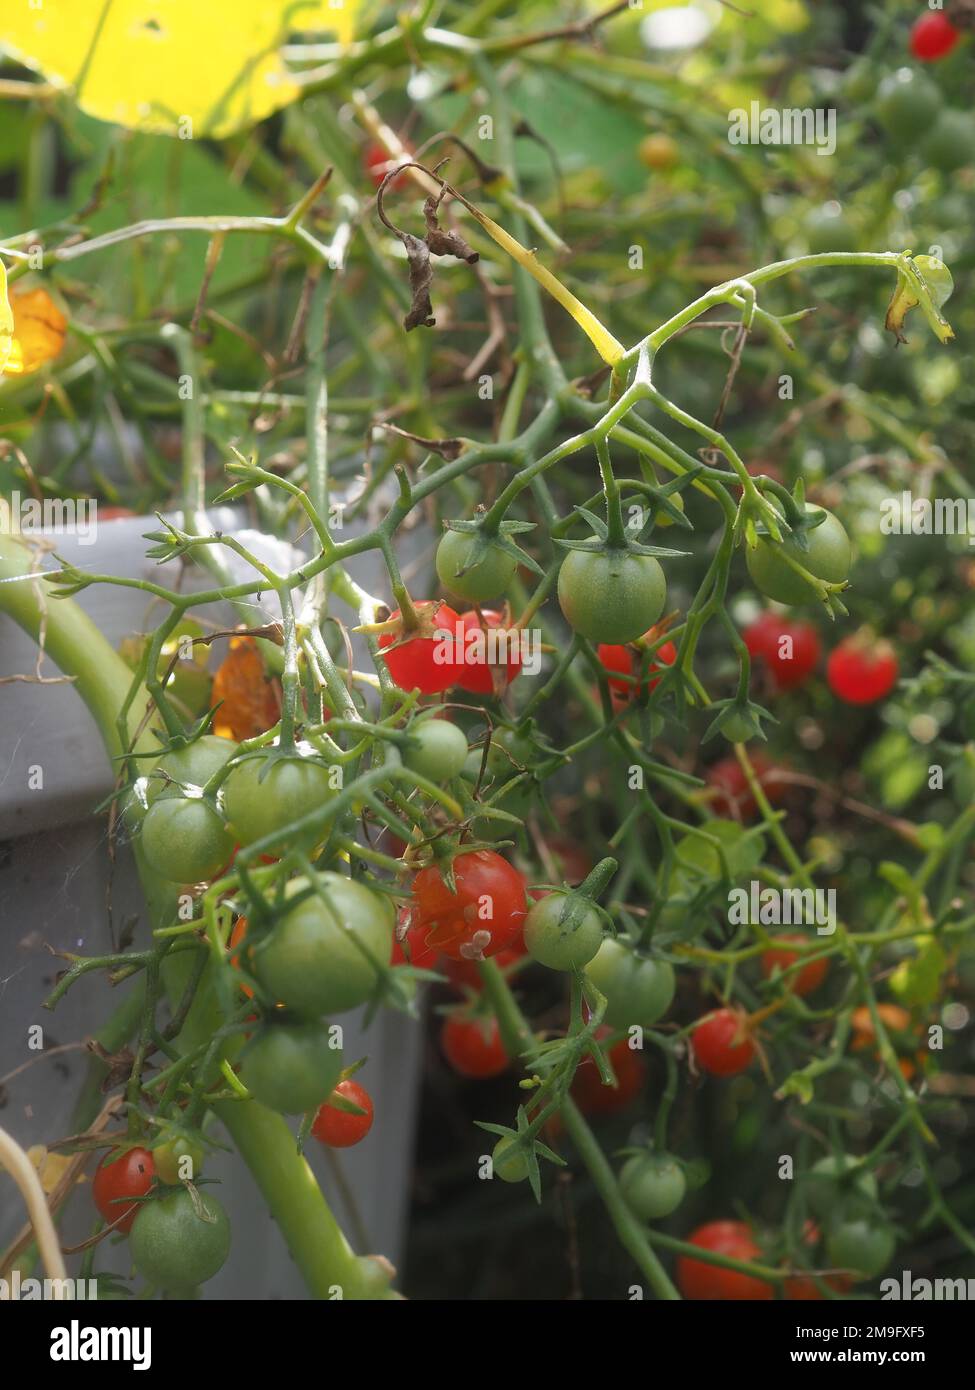 Close up of tomato plant 'Micro Cherry' growing in a container (Solanum lycopersicum) with fruit at varying degrees of ripeness Stock Photo